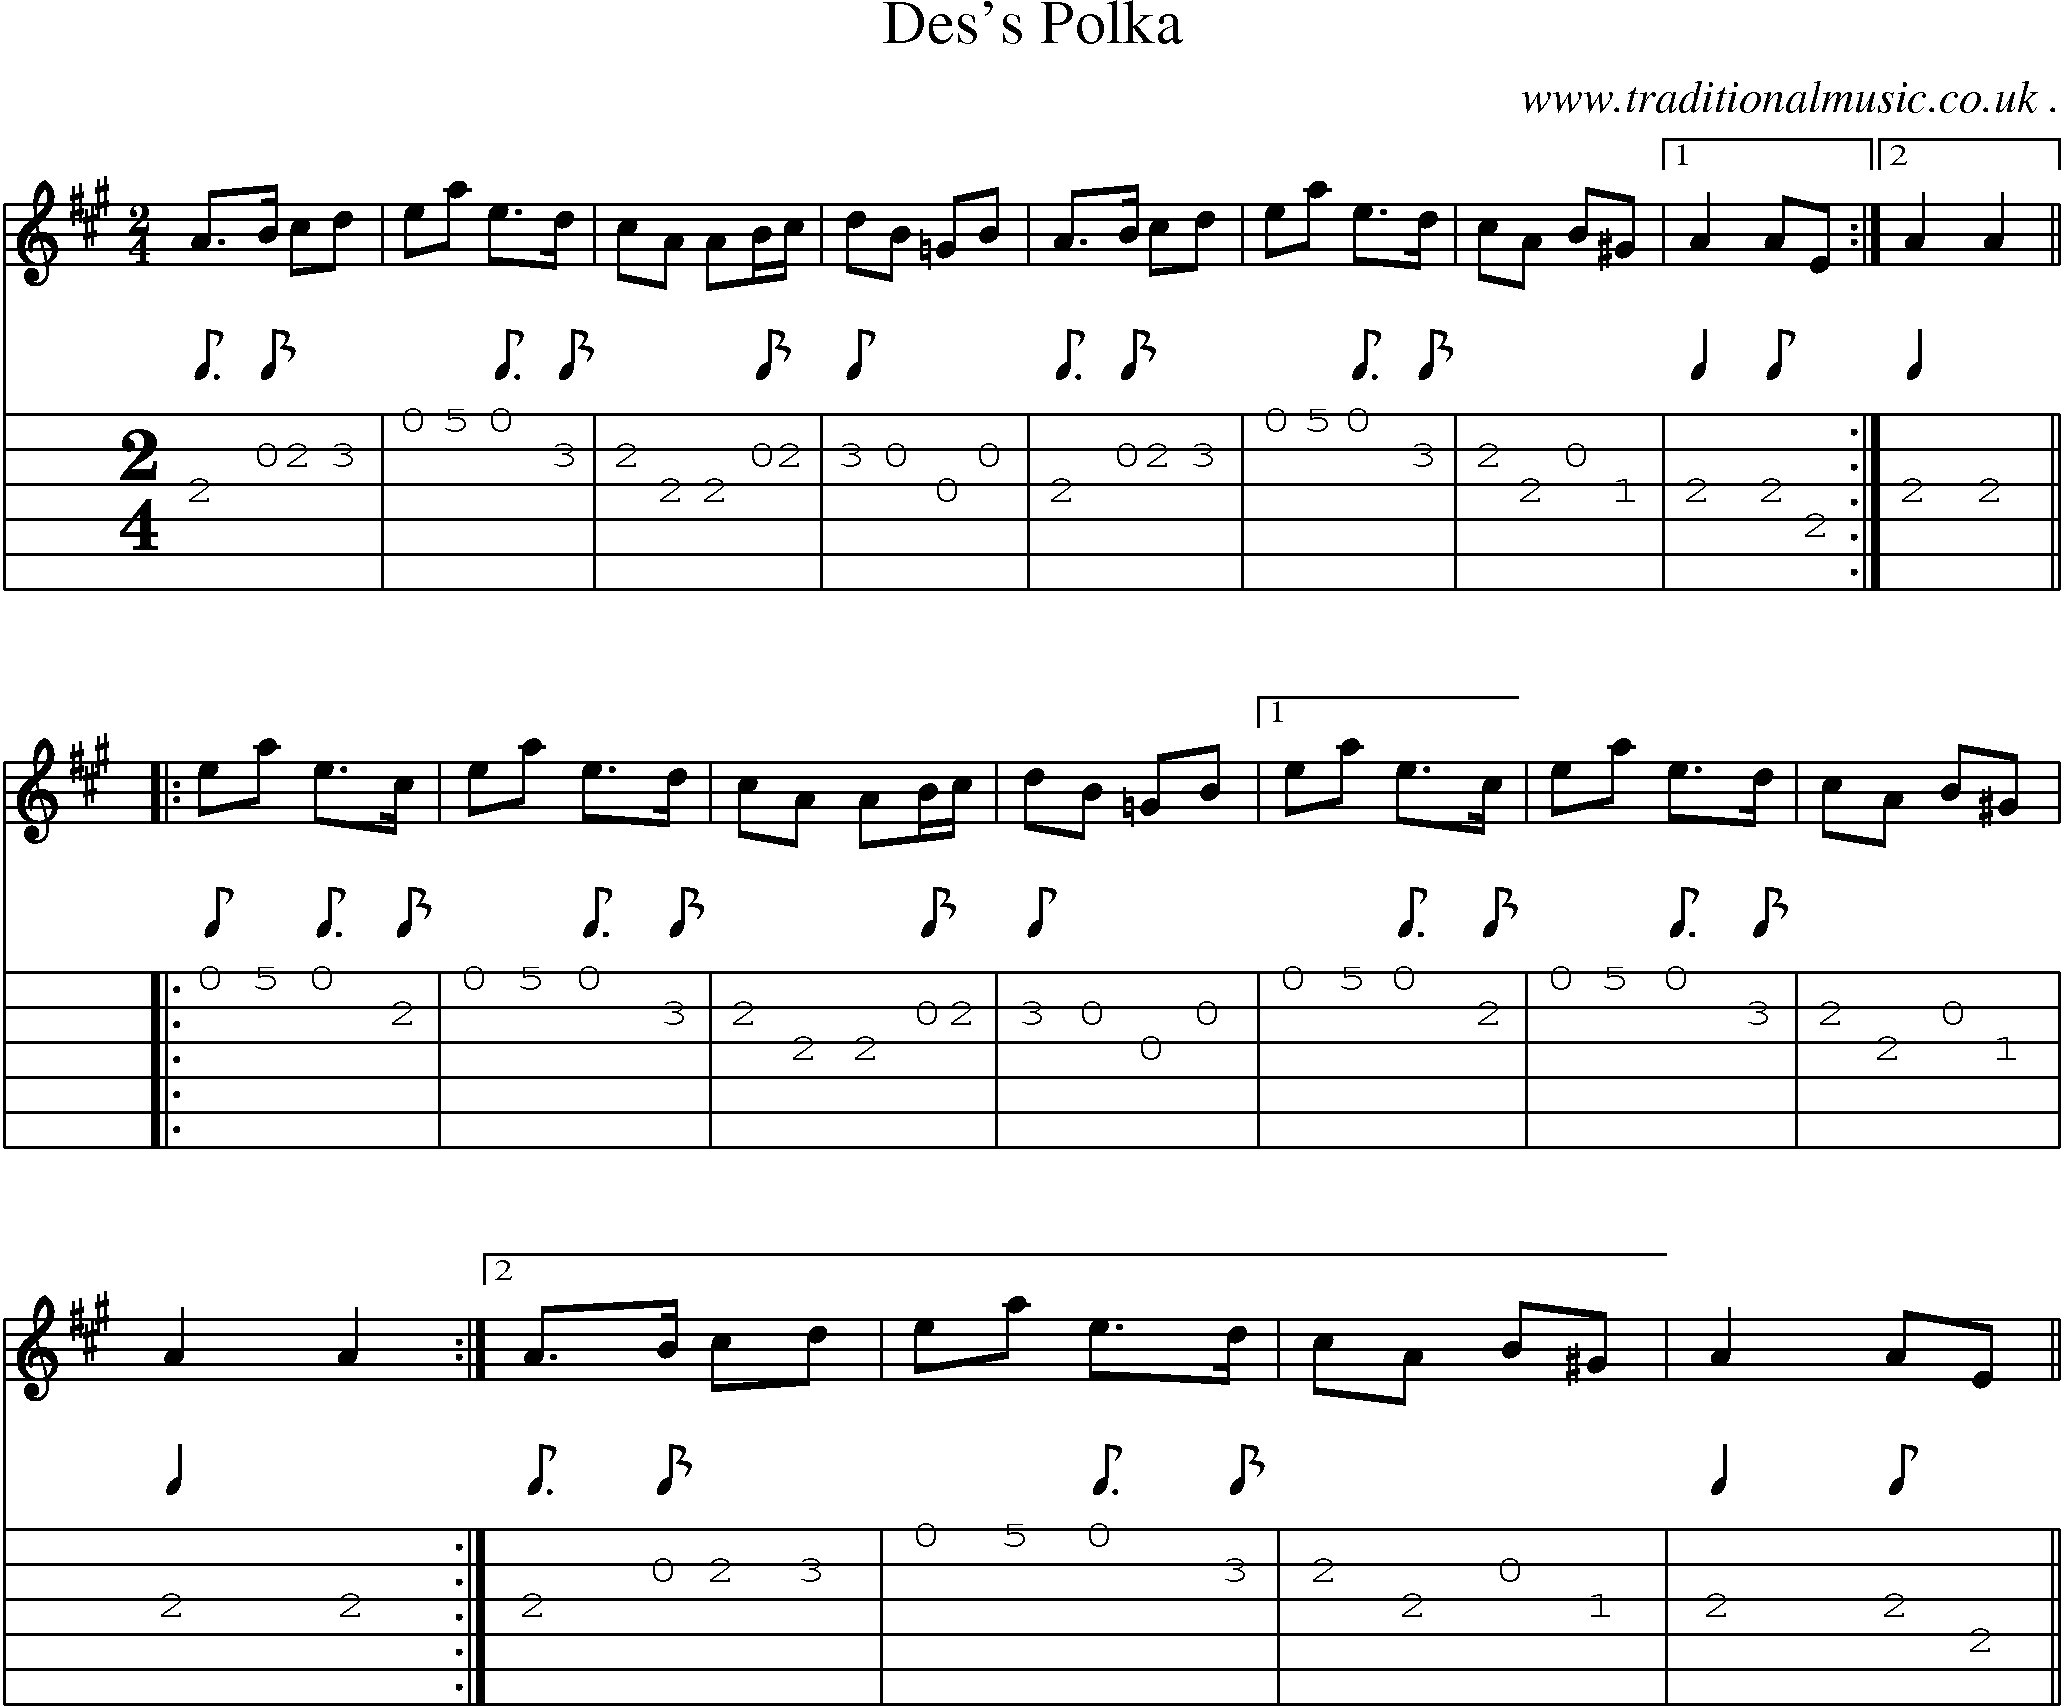 Sheet-Music and Guitar Tabs for Dess Polka